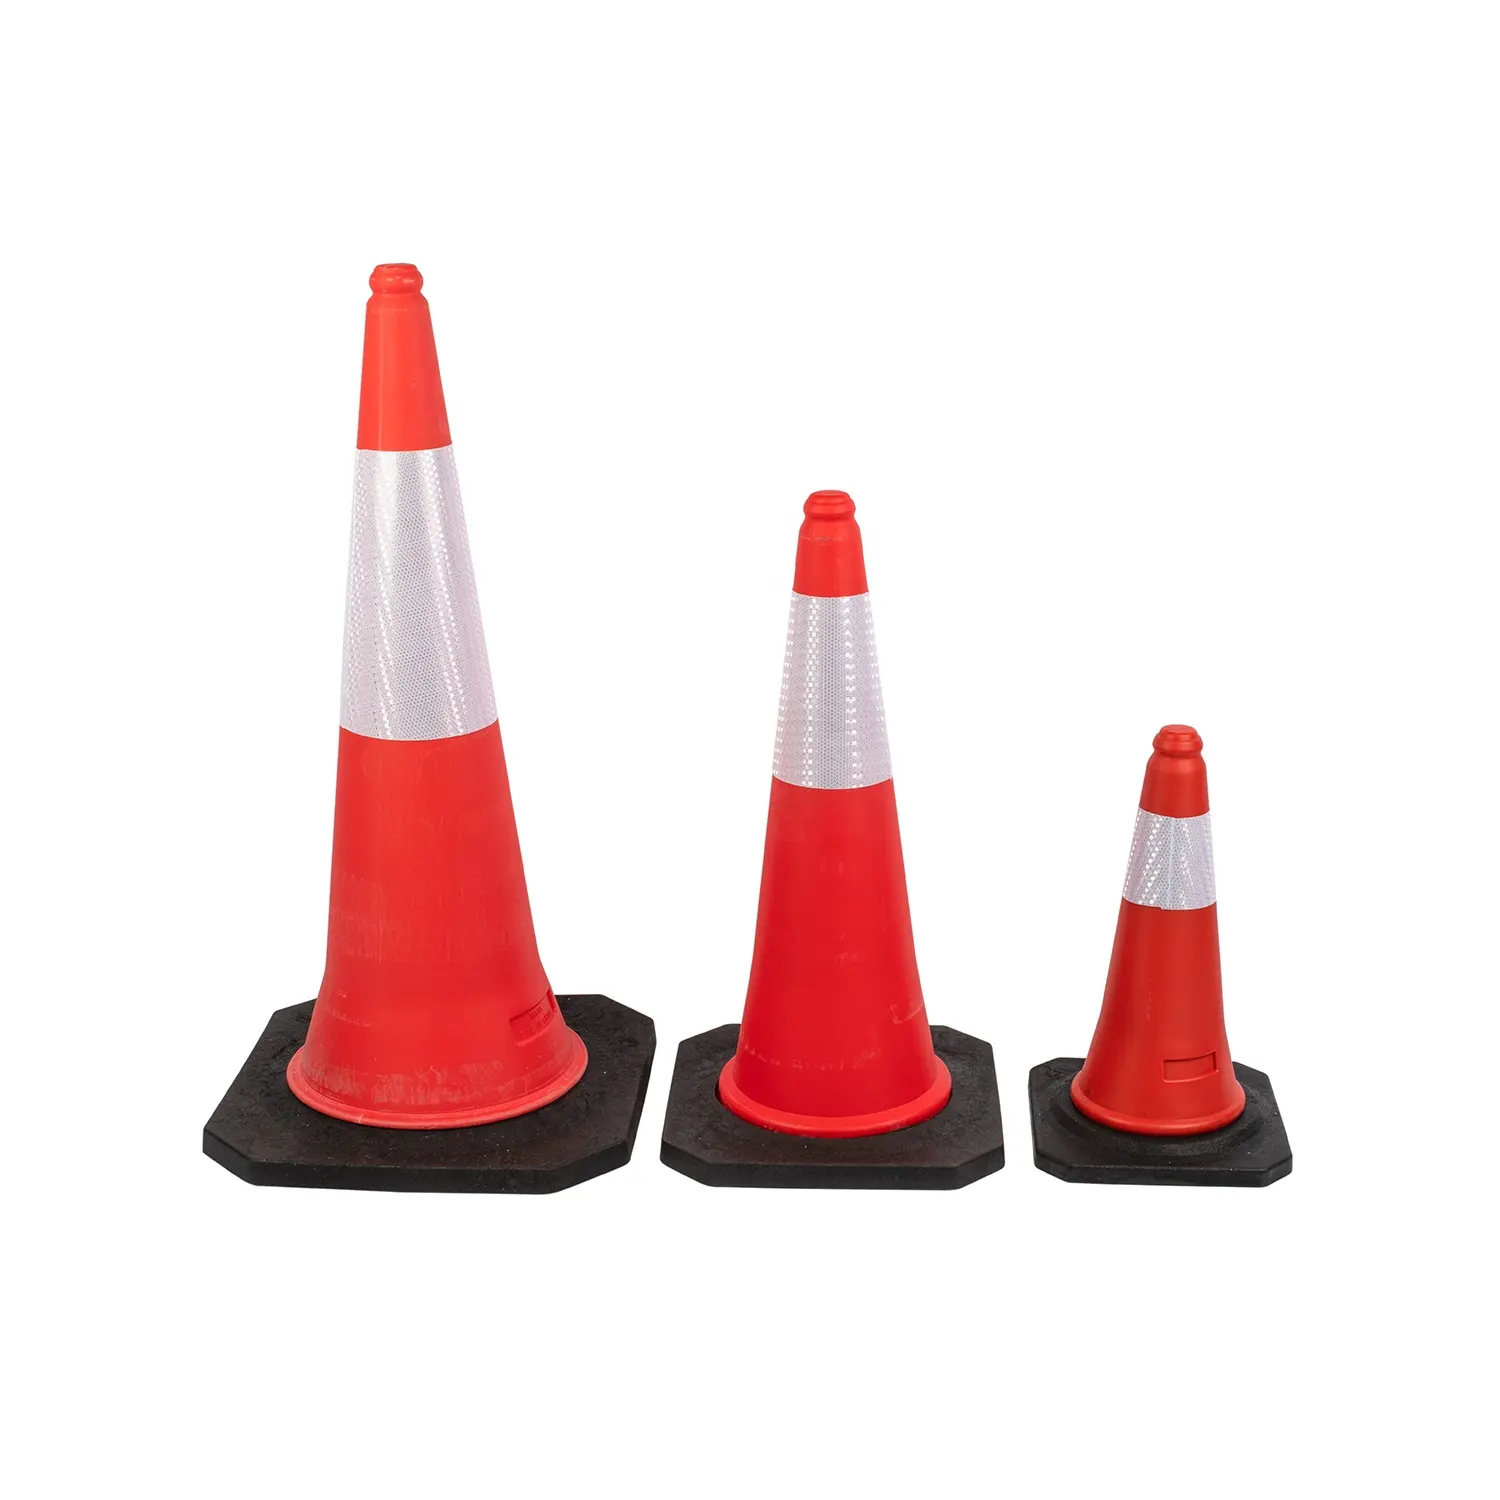 High quality Safety Cones with Reflective Films PVC Heavy-Duty Orange Construction Cones for Parking Lot  Driveway.